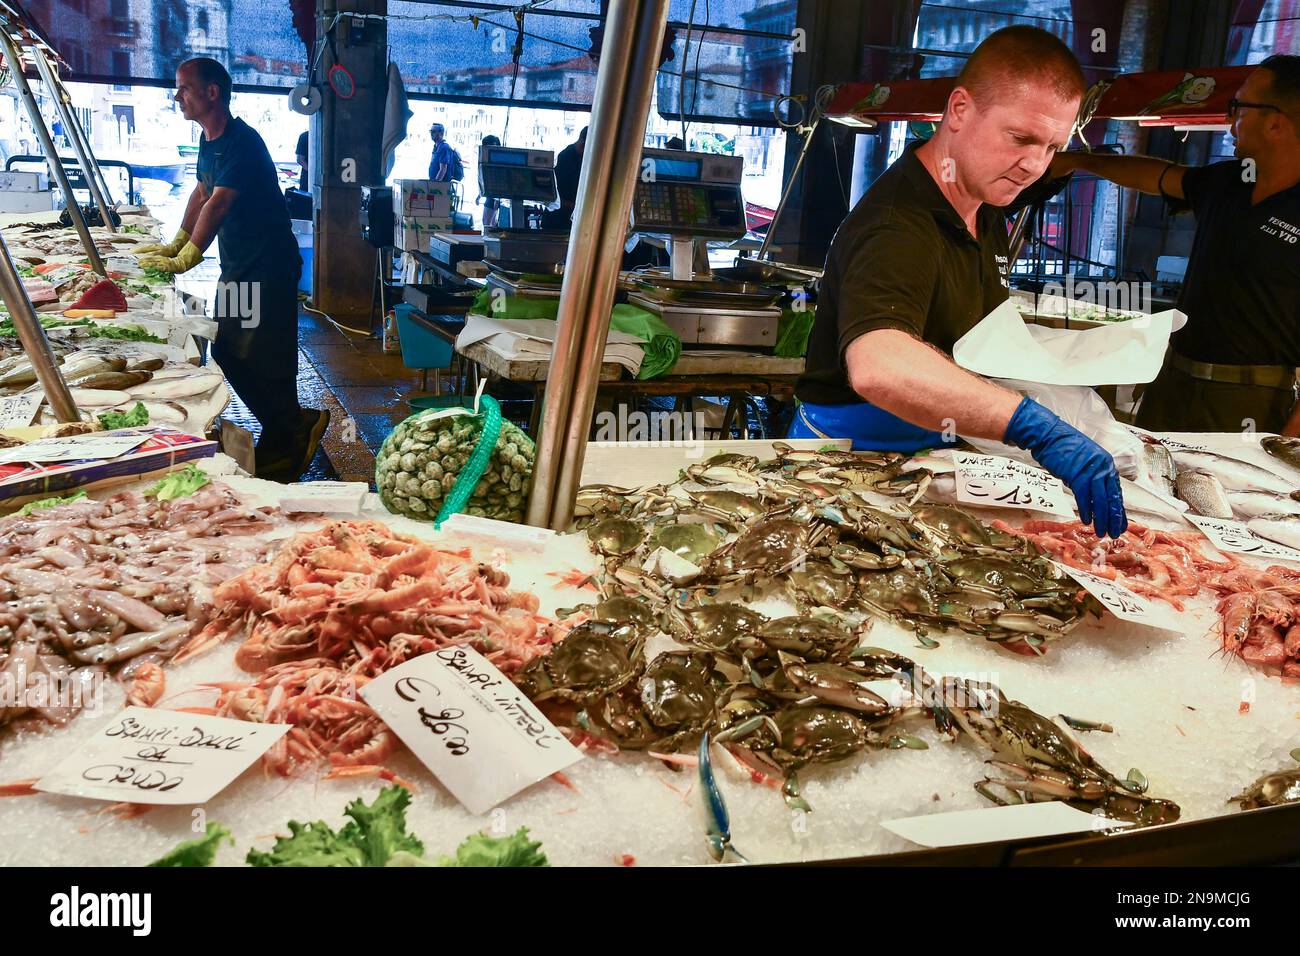 Fishmongers arranging the catch of the day on the counter under the Loggia of the Fish Market on the Grand Canal, sestiere of San Polo, Venice, Italy Stock Photo